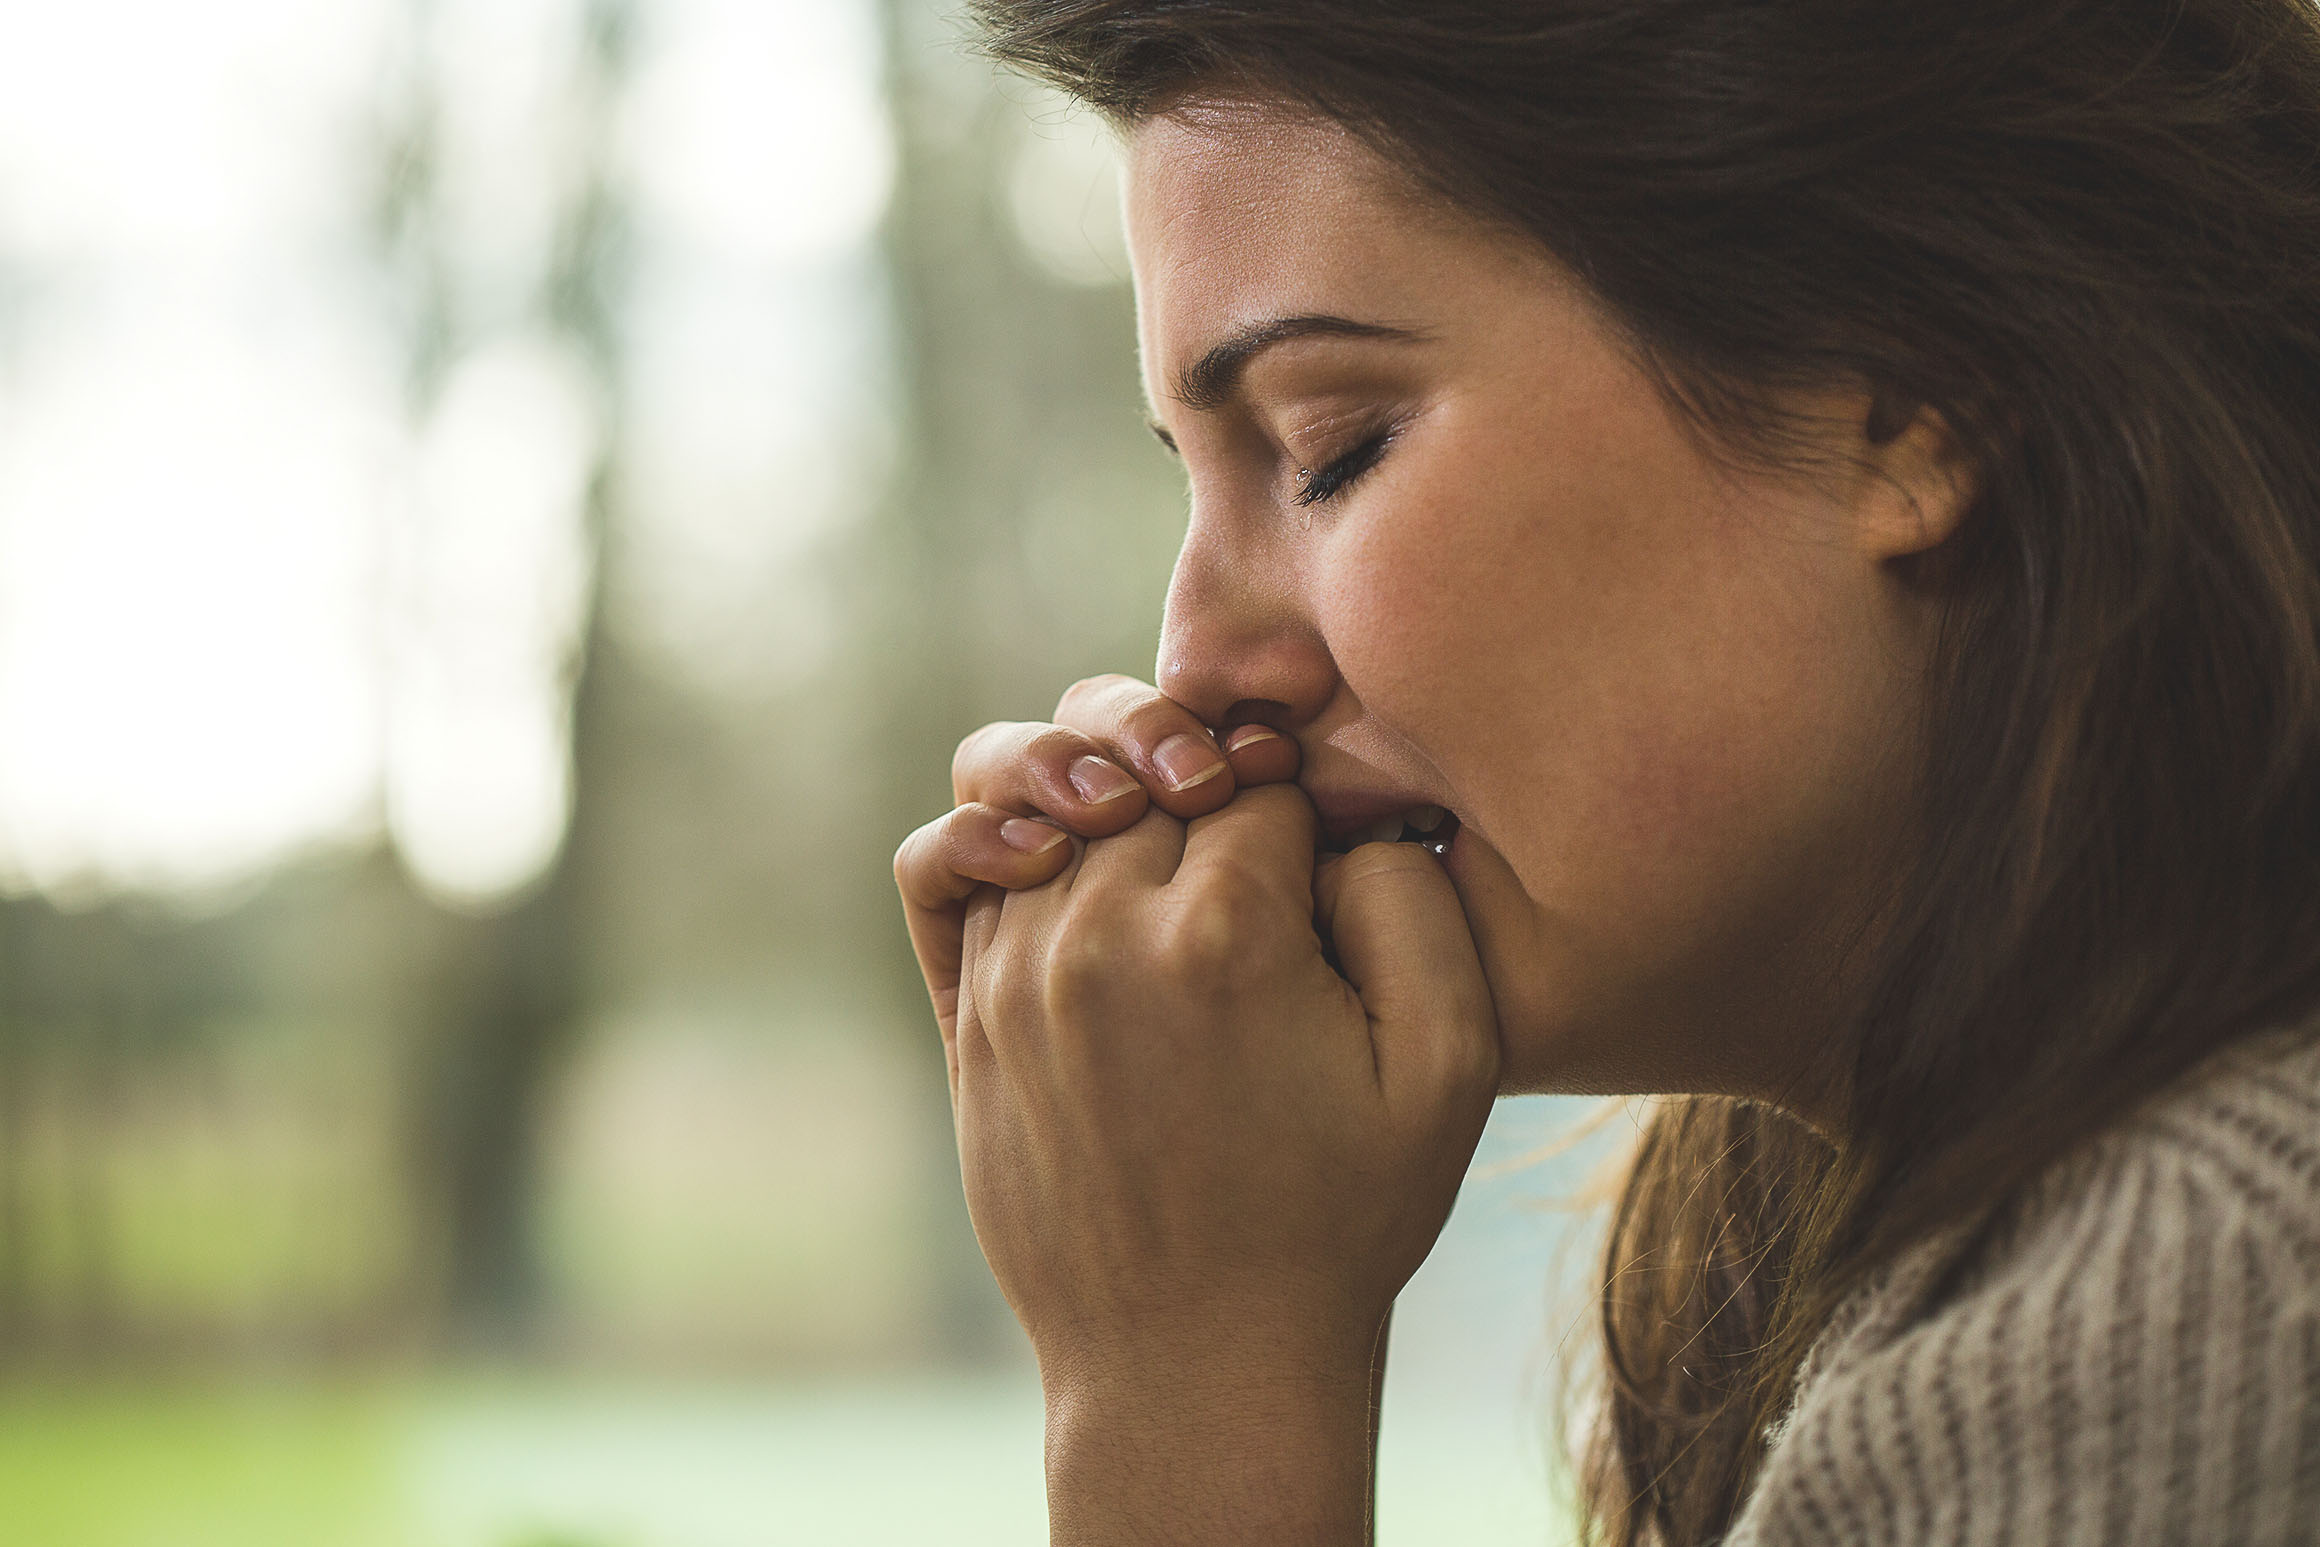 7 Real-Life Struggles That Jesus Can Identify With | RELEVANT